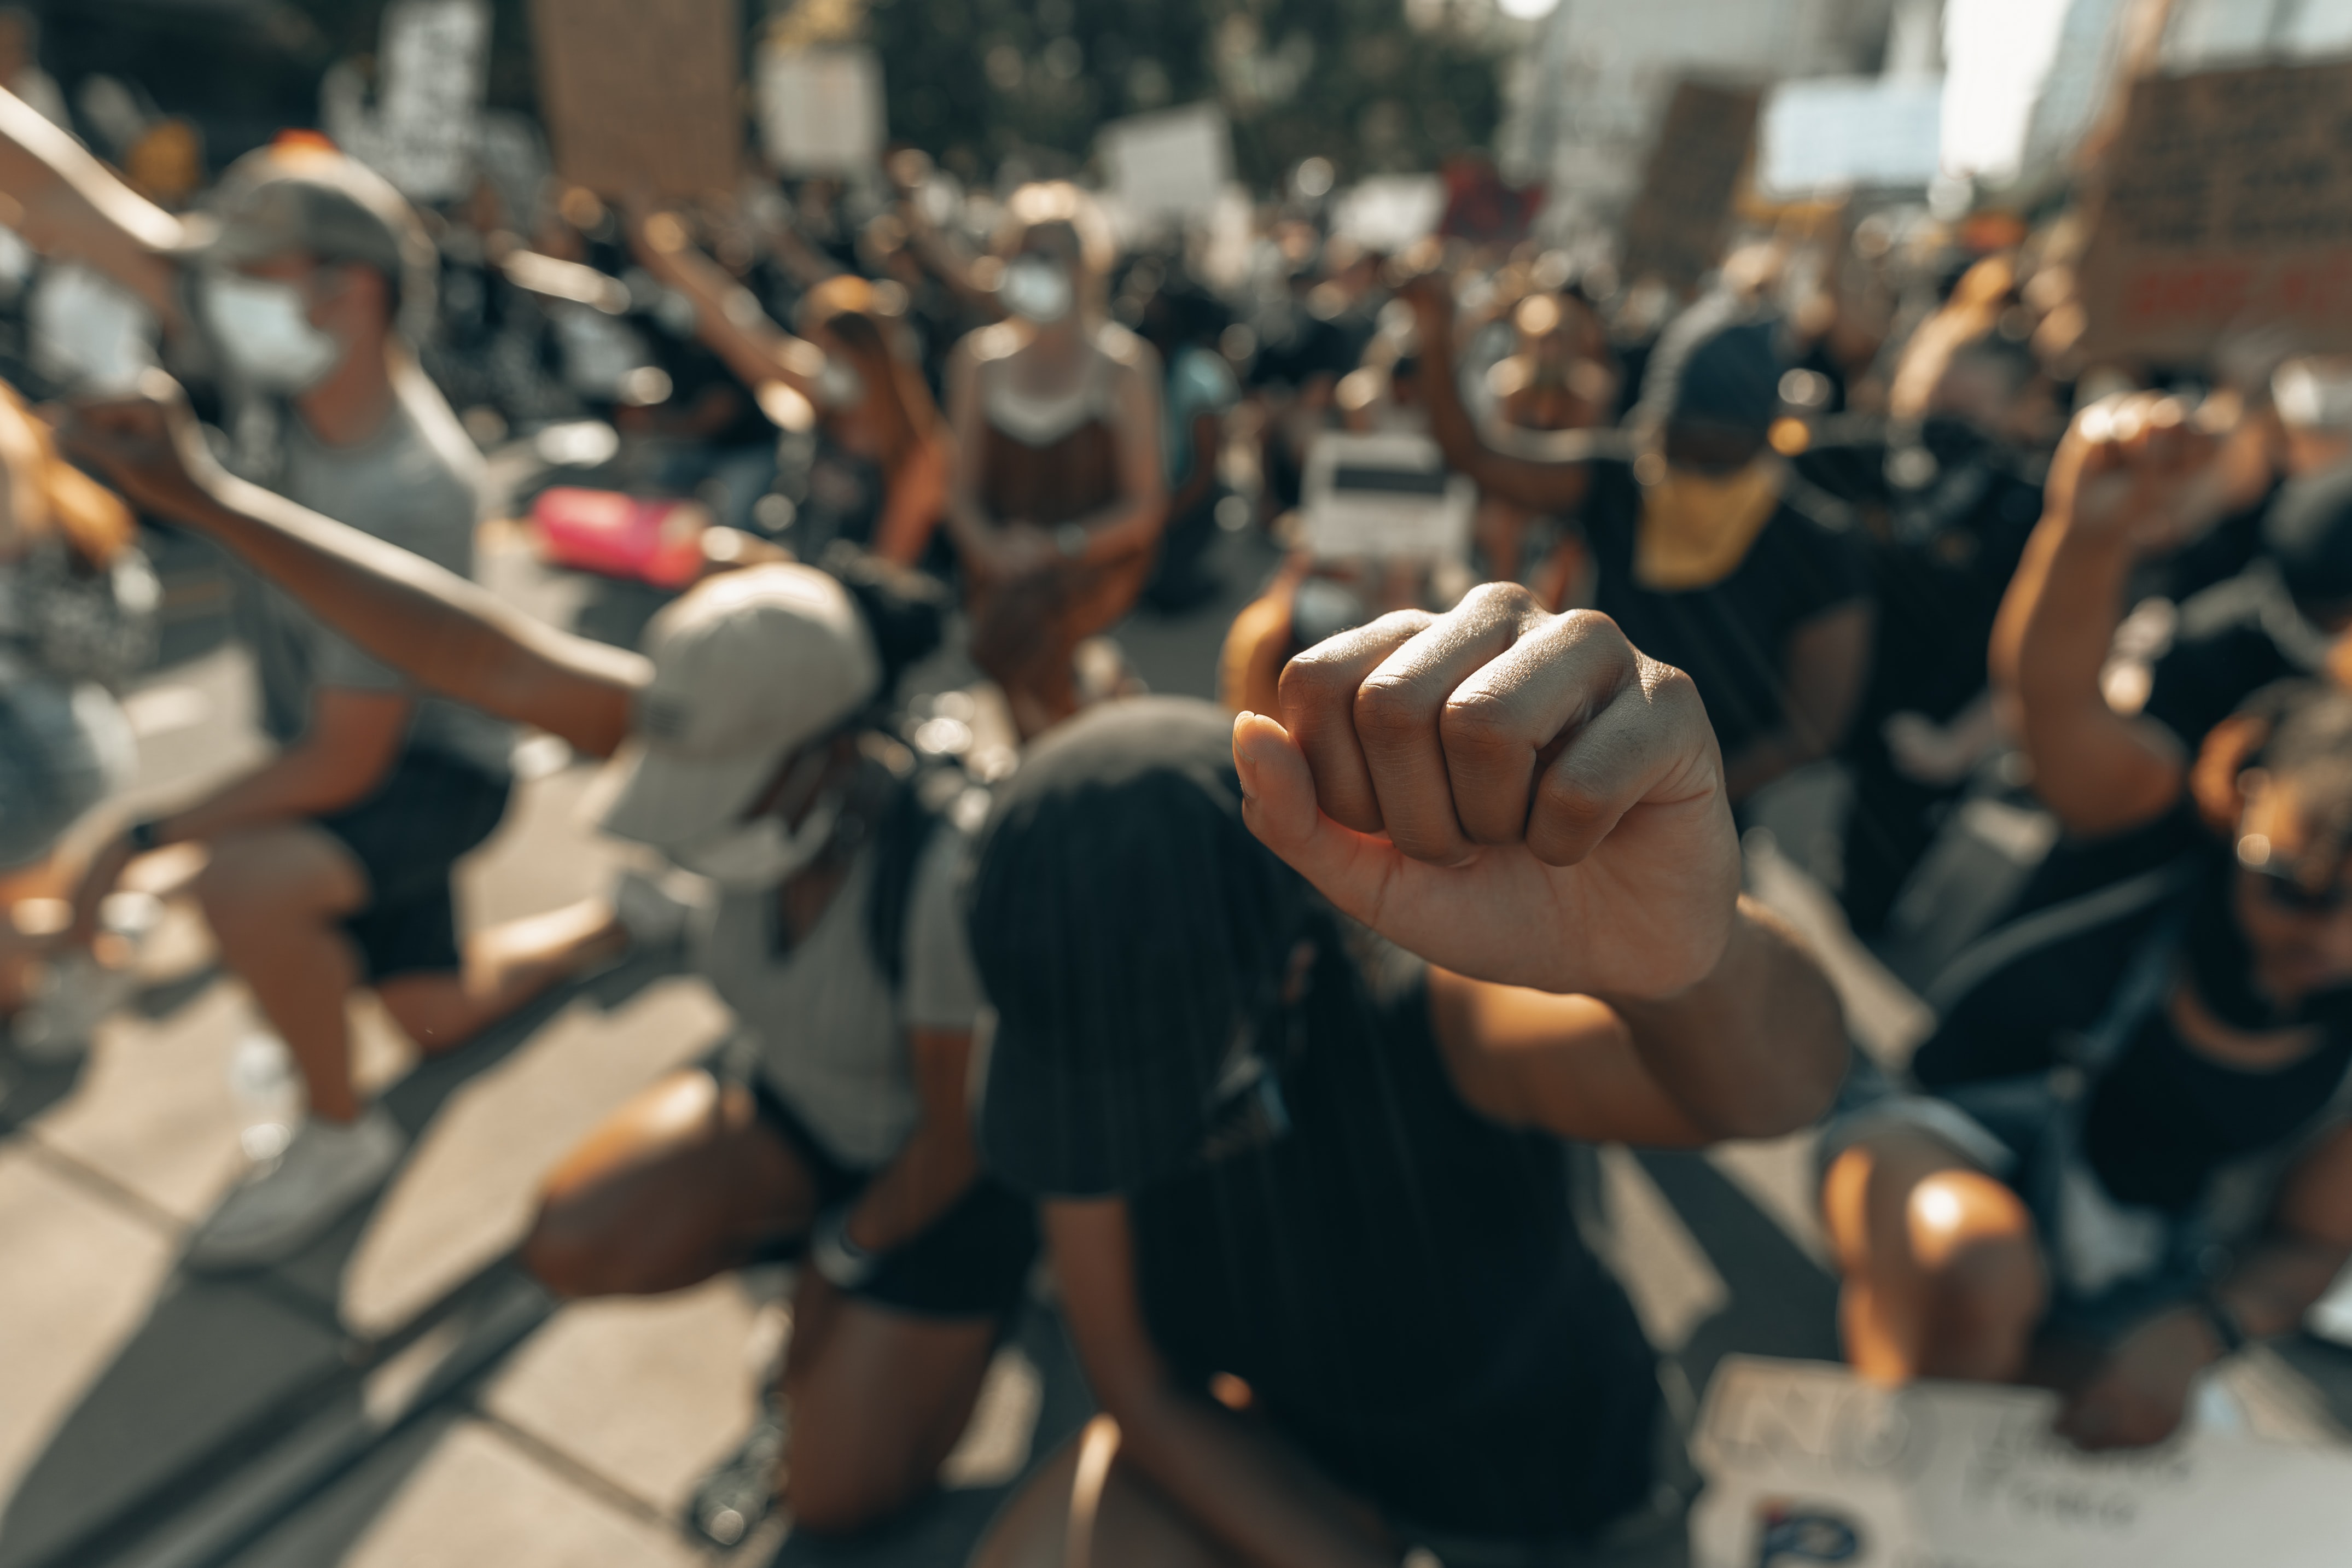 A fist raised in solidarity (social justice photo)